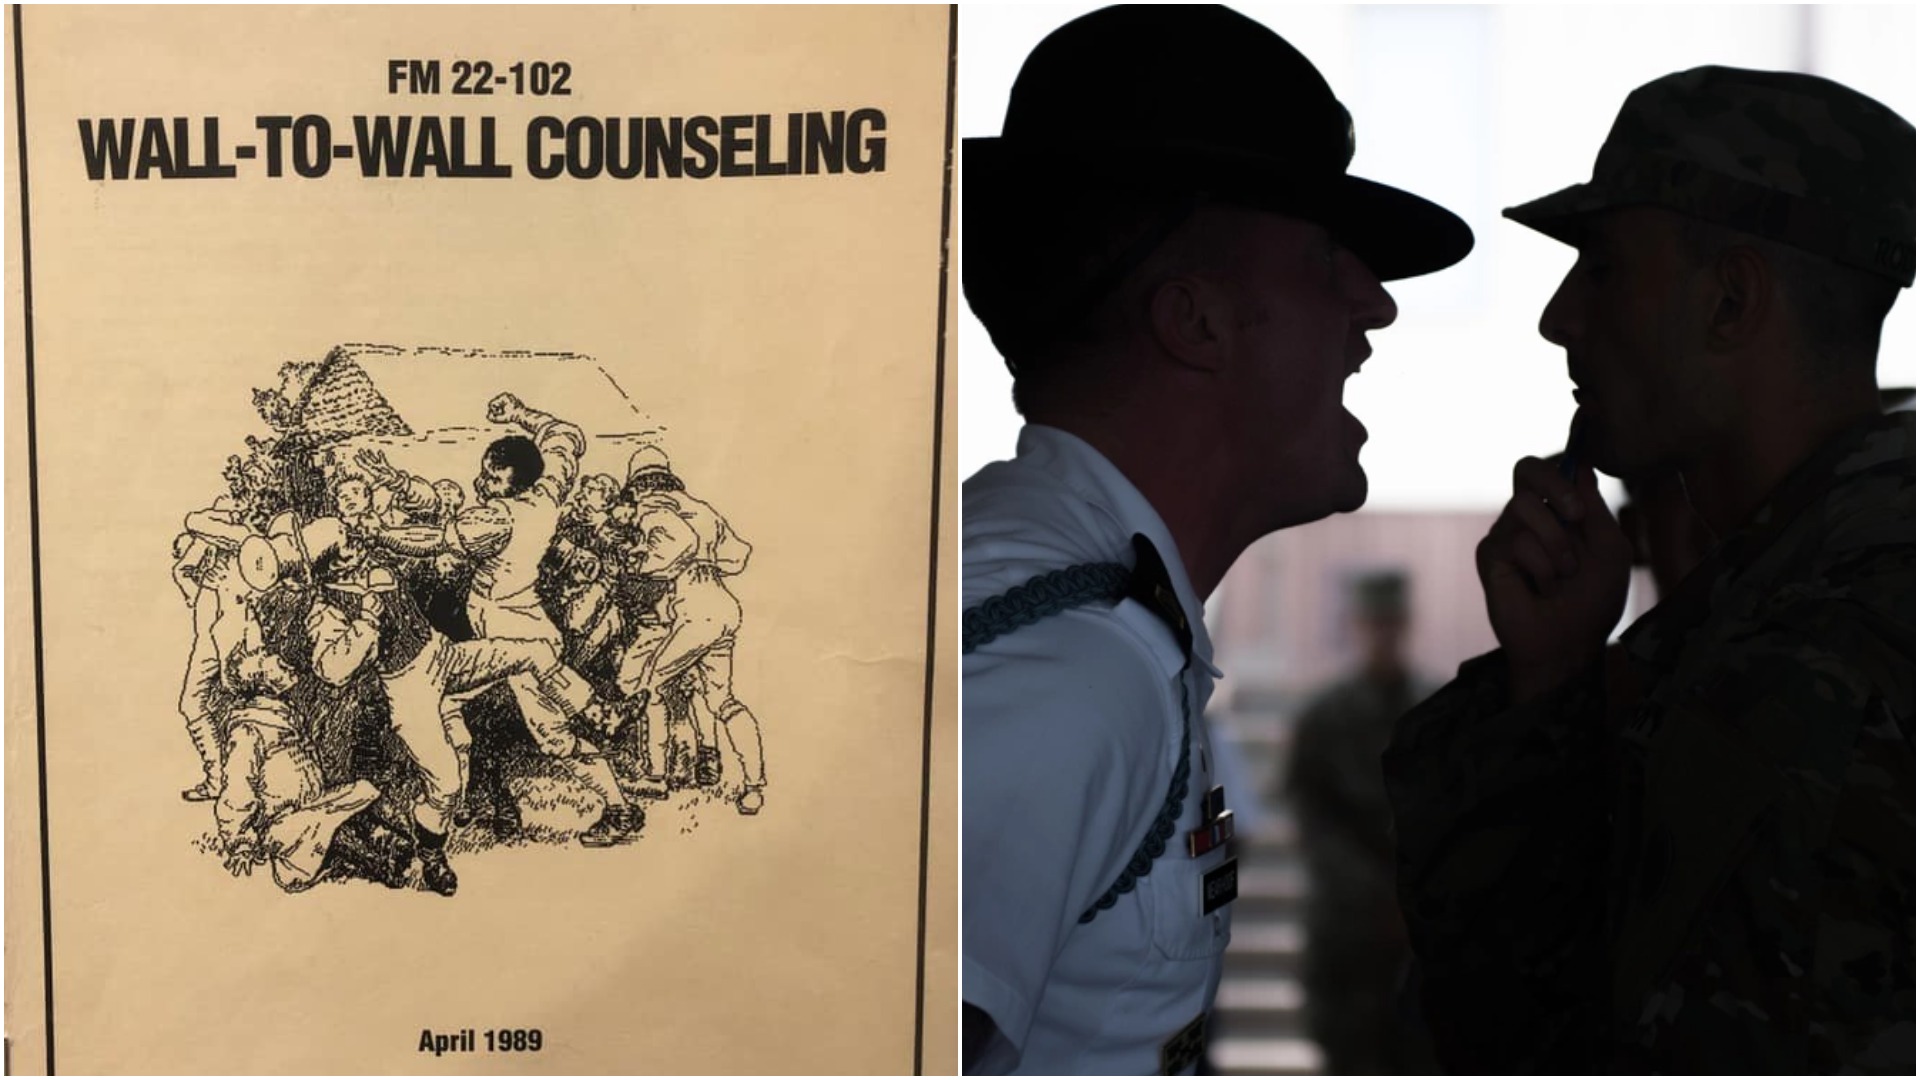 The legend of ‘wall-to-wall counseling,’ the infamous military regulation that never existed